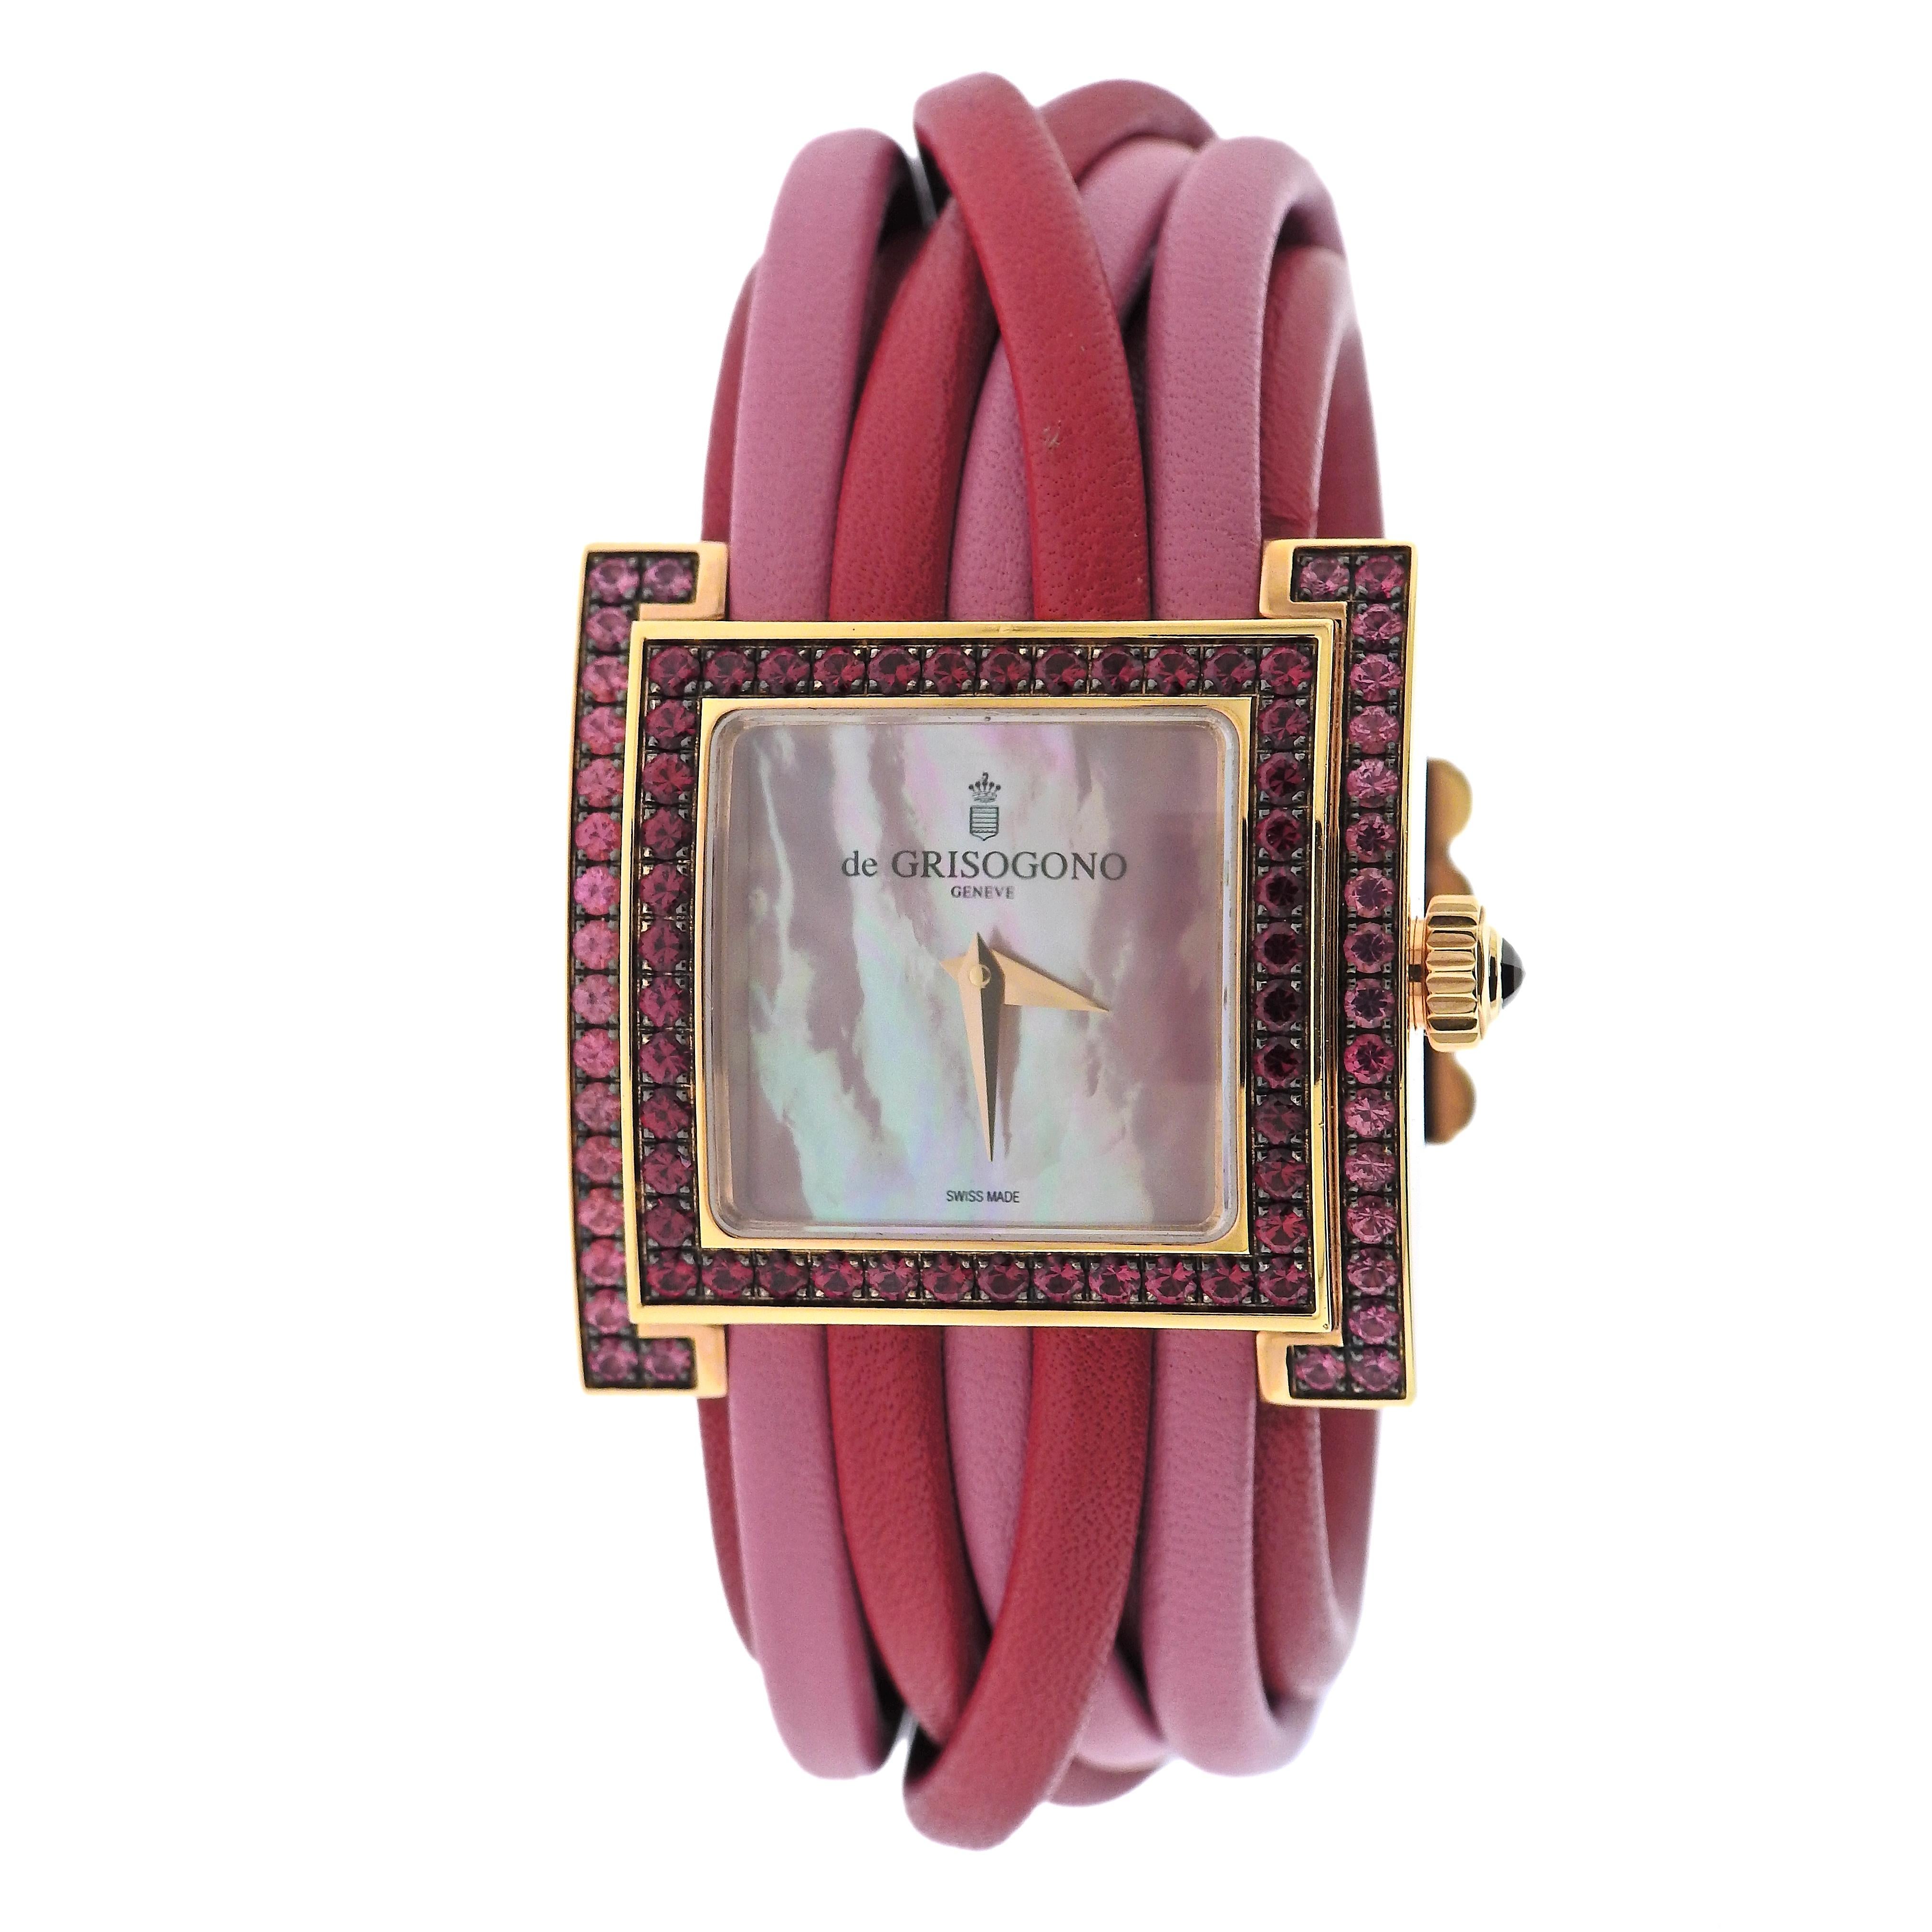 New with tag de Grisogono Allegra watch, featuring 18k yellow gold case, adorned with rubies and pink sapphires, mother of pearl dial, pink and red leather bracelet. Quartz movement. Comes with box and papers. Case - 33mm excl. crown x 34mm.